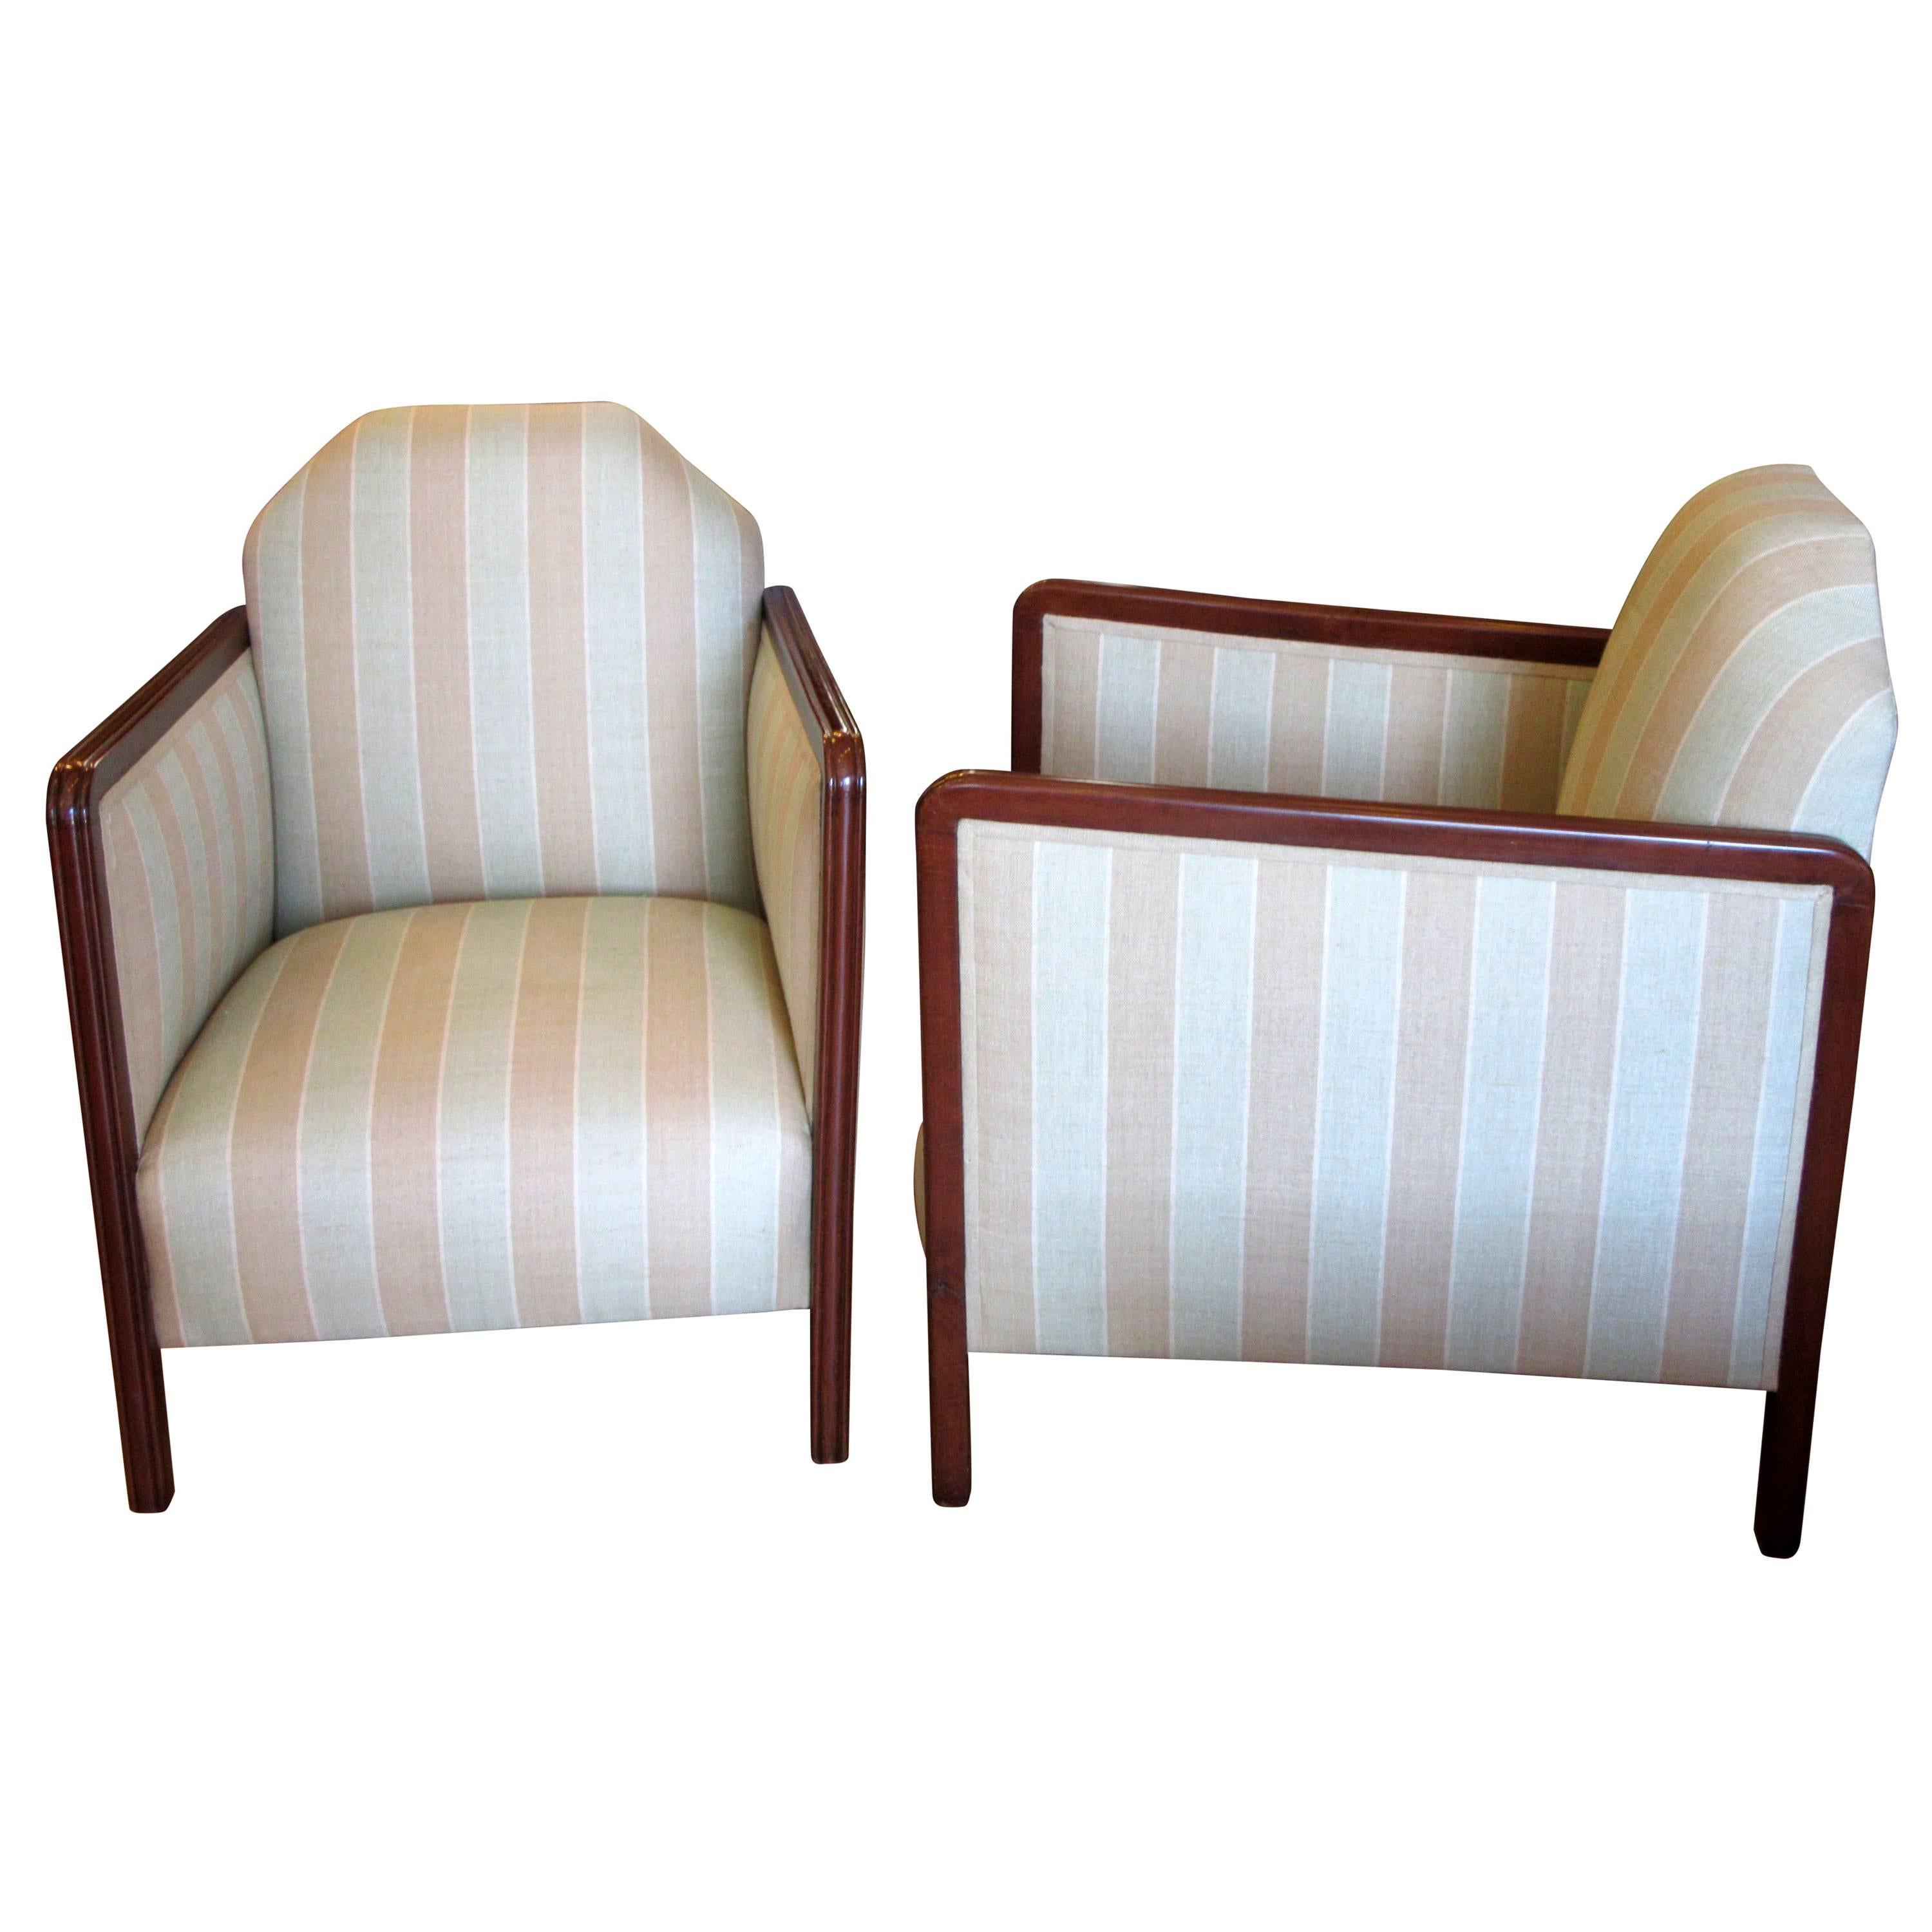 Pair of French Art Deco Upholstered Club Chairs